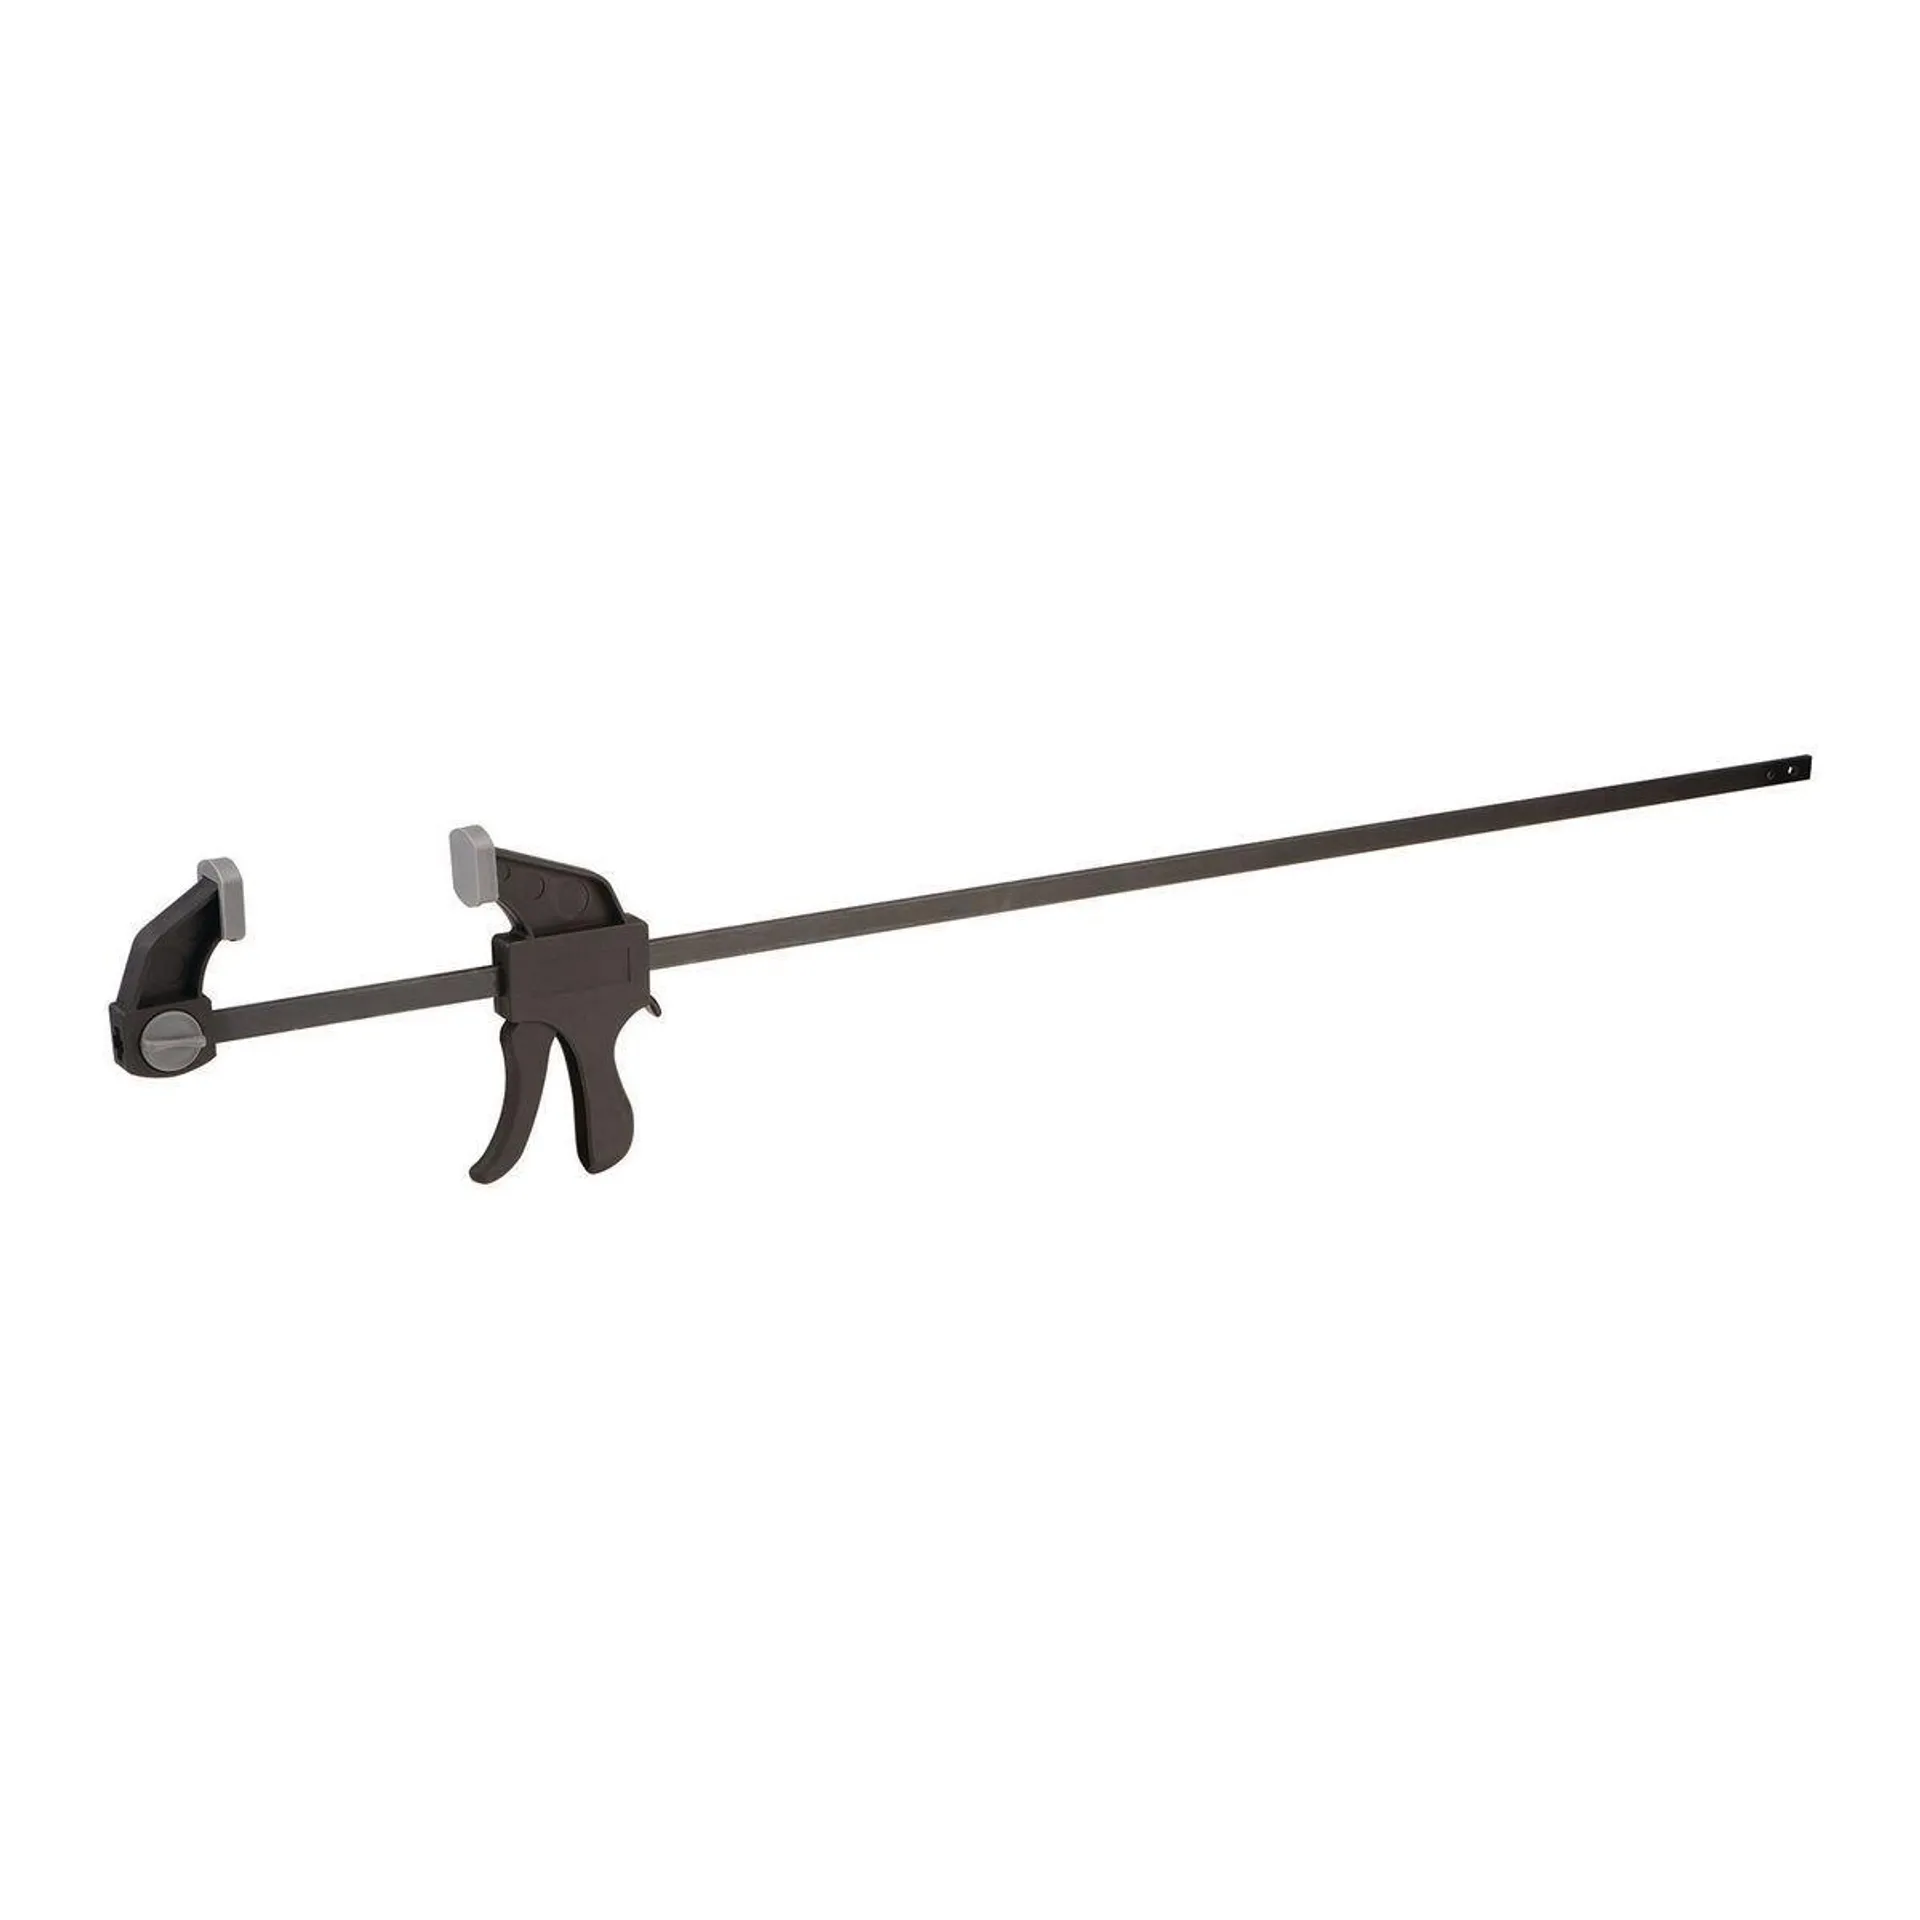 36 in. Ratcheting Bar Clamp/Spreader